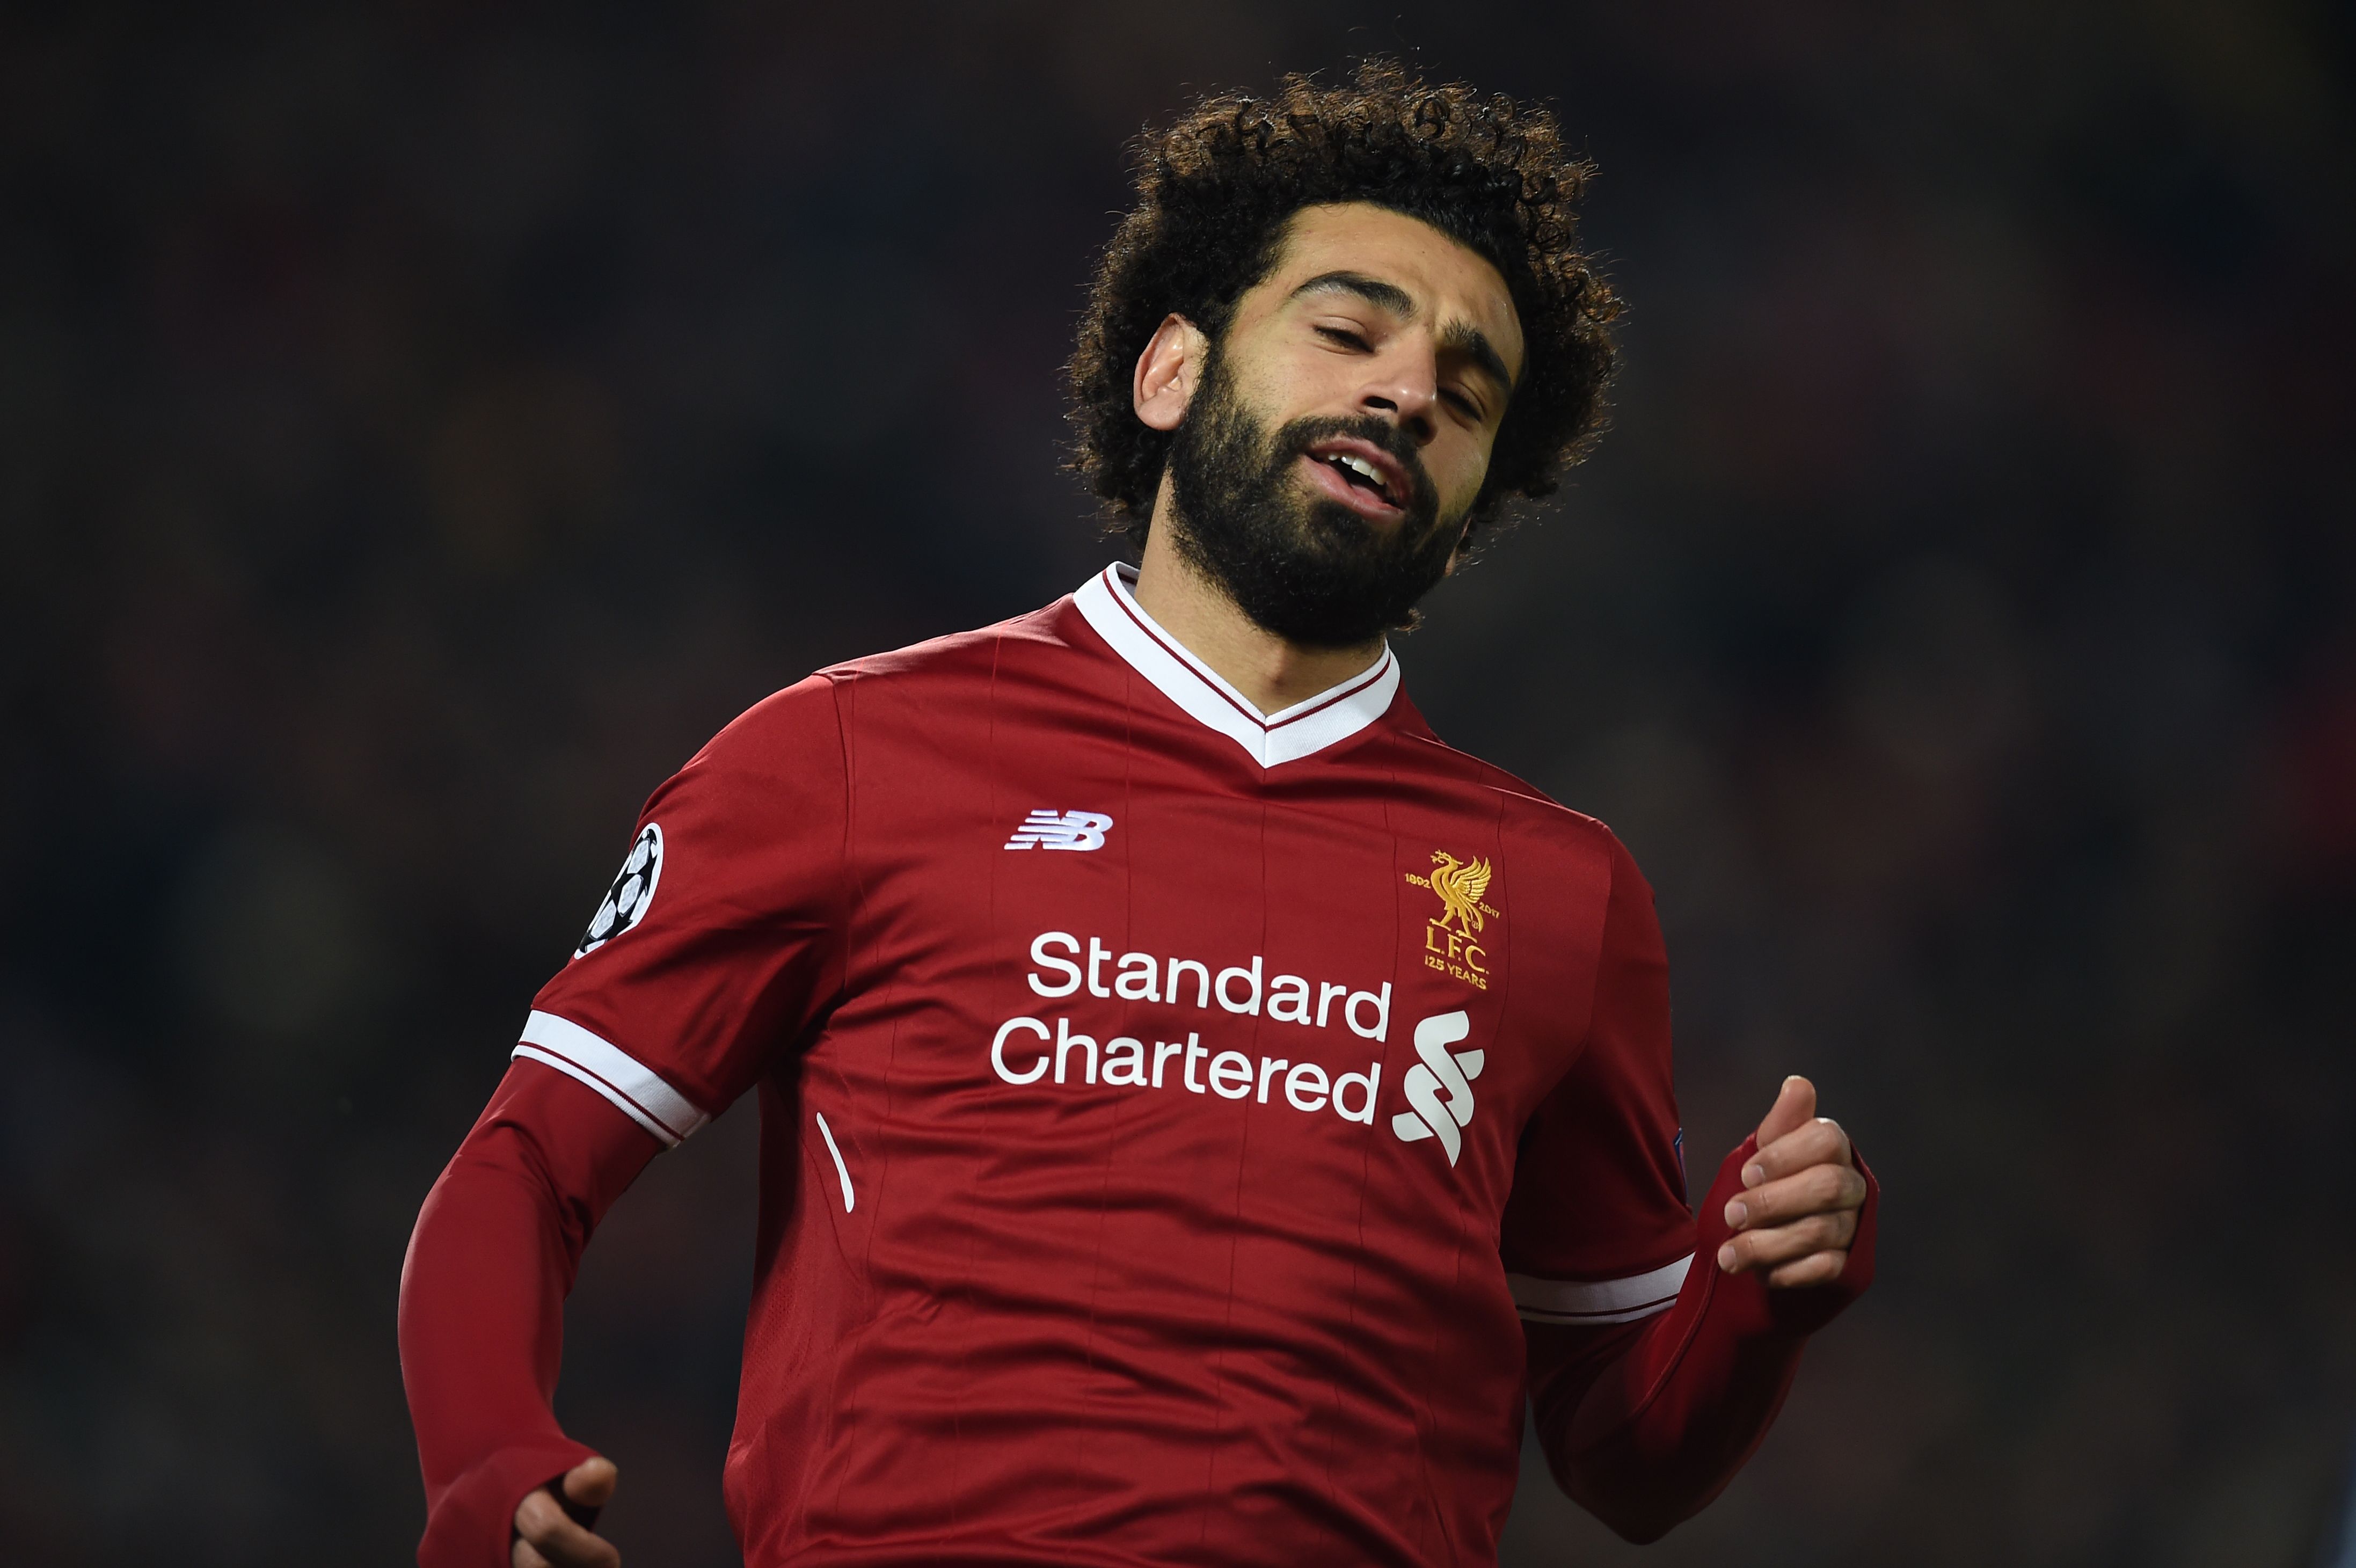 Liverpool's Egyptian midfielder Mohamed Salah gestures during the UEFA Champions League round of sixteen second leg football match between Liverpool and FC Porto at Anfield in Liverpool, north-west England on March 6, 2018. / AFP PHOTO / PAUL ELLIS        (Photo credit should read PAUL ELLIS/AFP/Getty Images)